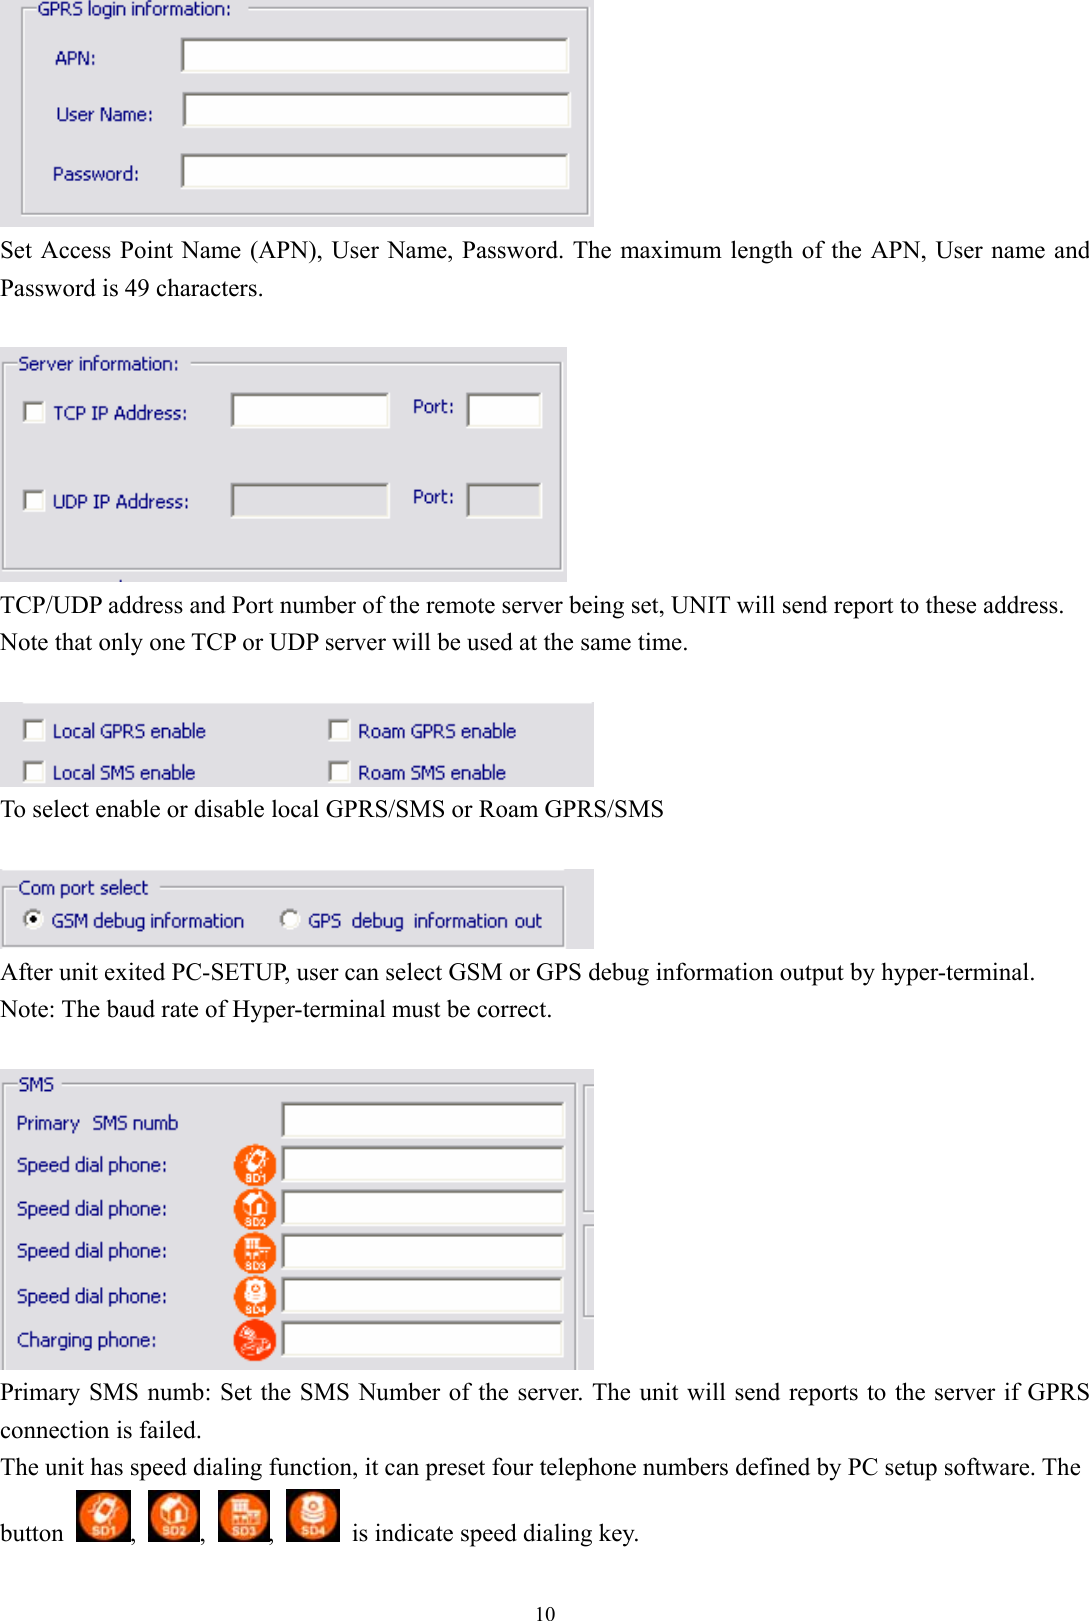  10 Set Access Point Name (APN), User Name, Password. The maximum length of the APN, User name and Password is 49 characters.     TCP/UDP address and Port number of the remote server being set, UNIT will send report to these address.   Note that only one TCP or UDP server will be used at the same time.     To select enable or disable local GPRS/SMS or Roam GPRS/SMS   After unit exited PC-SETUP, user can select GSM or GPS debug information output by hyper-terminal. Note: The baud rate of Hyper-terminal must be correct.   Primary SMS numb: Set the SMS Number of the server. The unit will send reports to the server if GPRS connection is failed. The unit has speed dialing function, it can preset four telephone numbers defined by PC setup software. The button  ,  ,  ,    is indicate speed dialing key. 